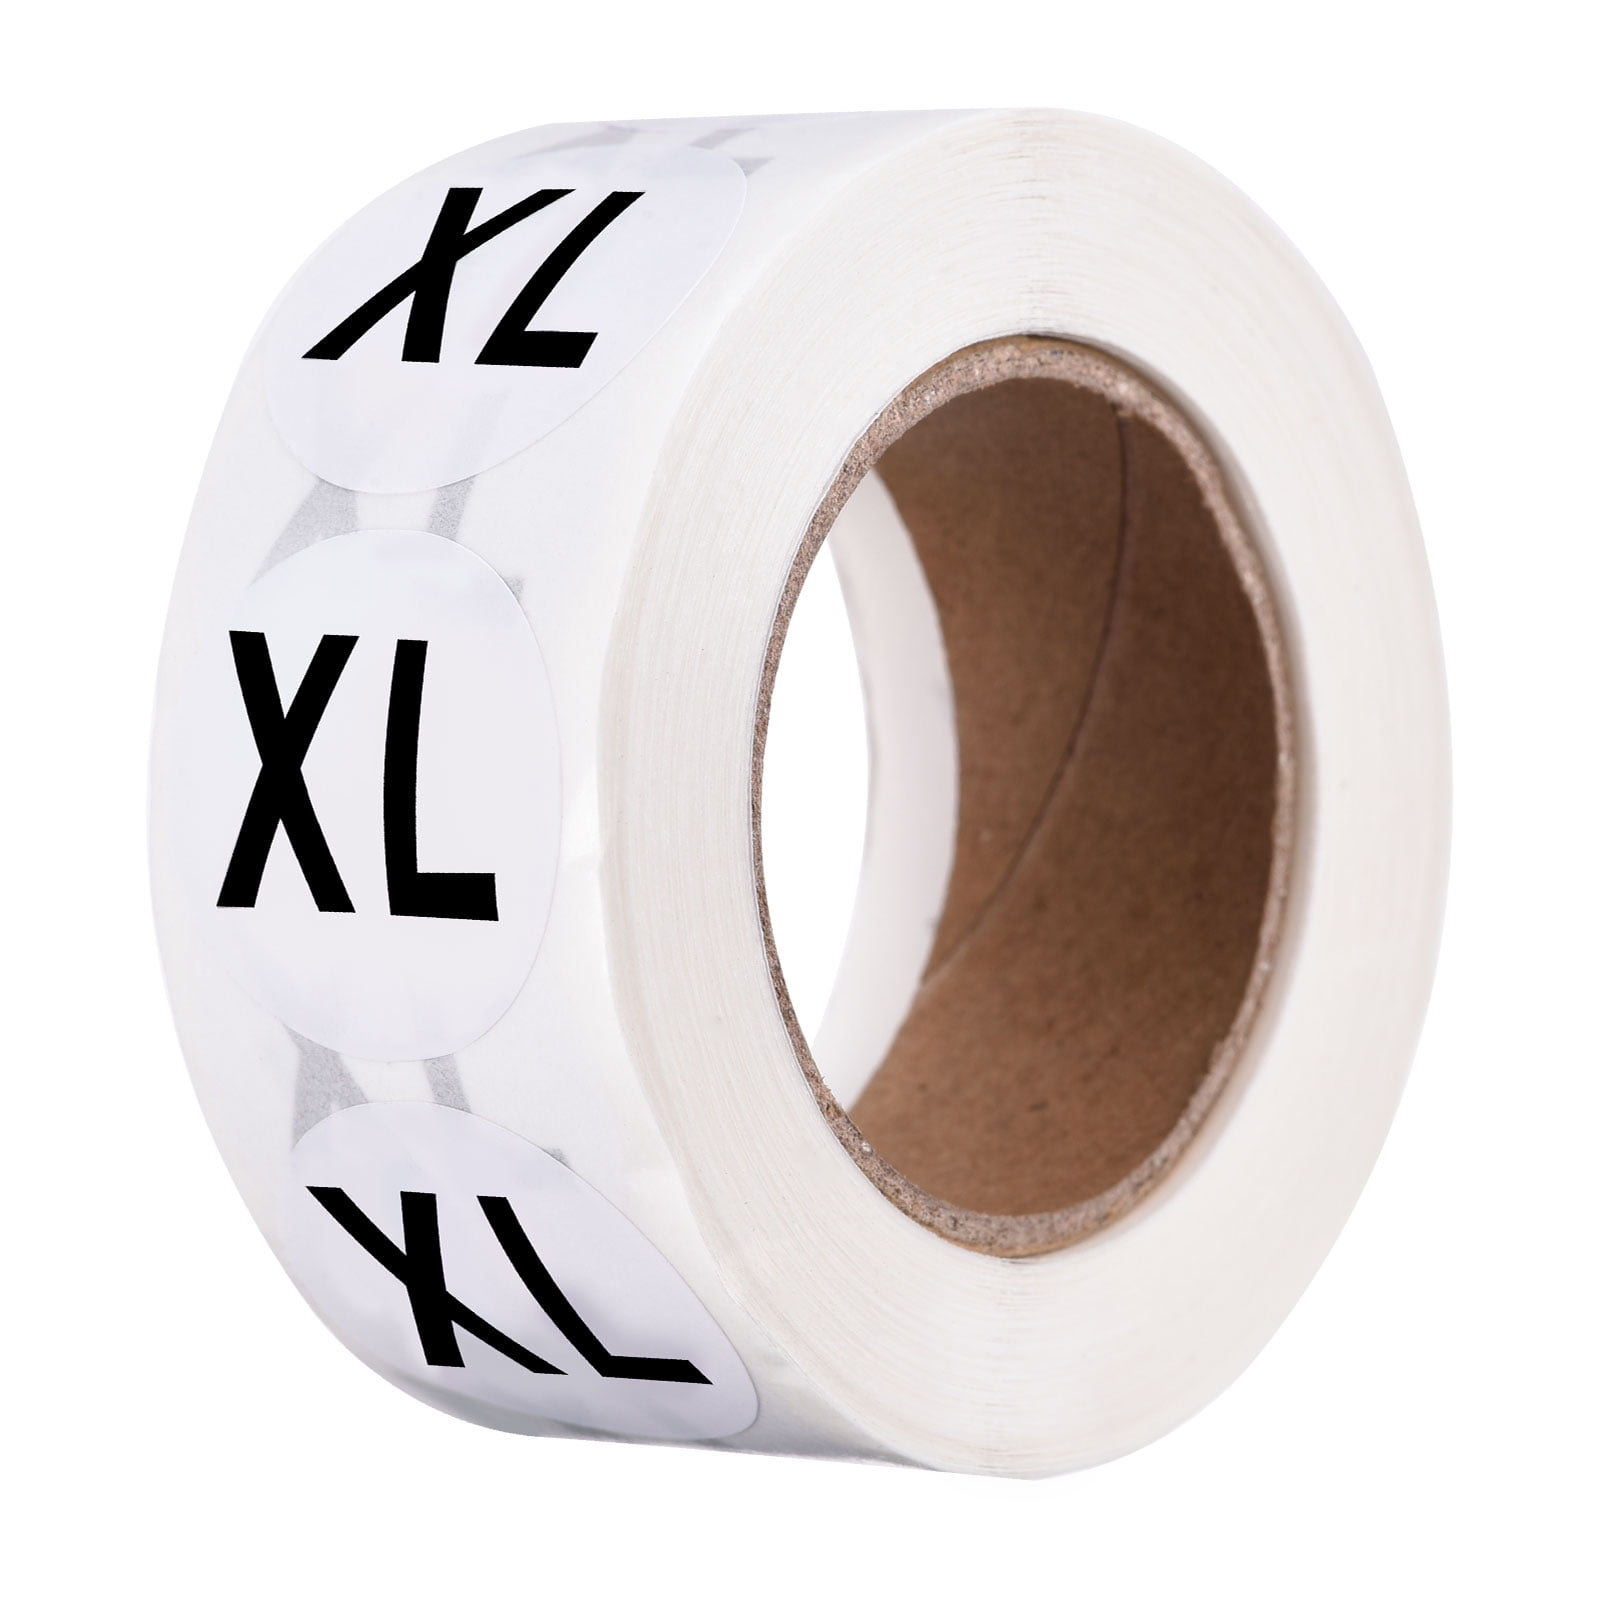 Personalised Printed Round Price White Self Adhesive Labels 25mm 